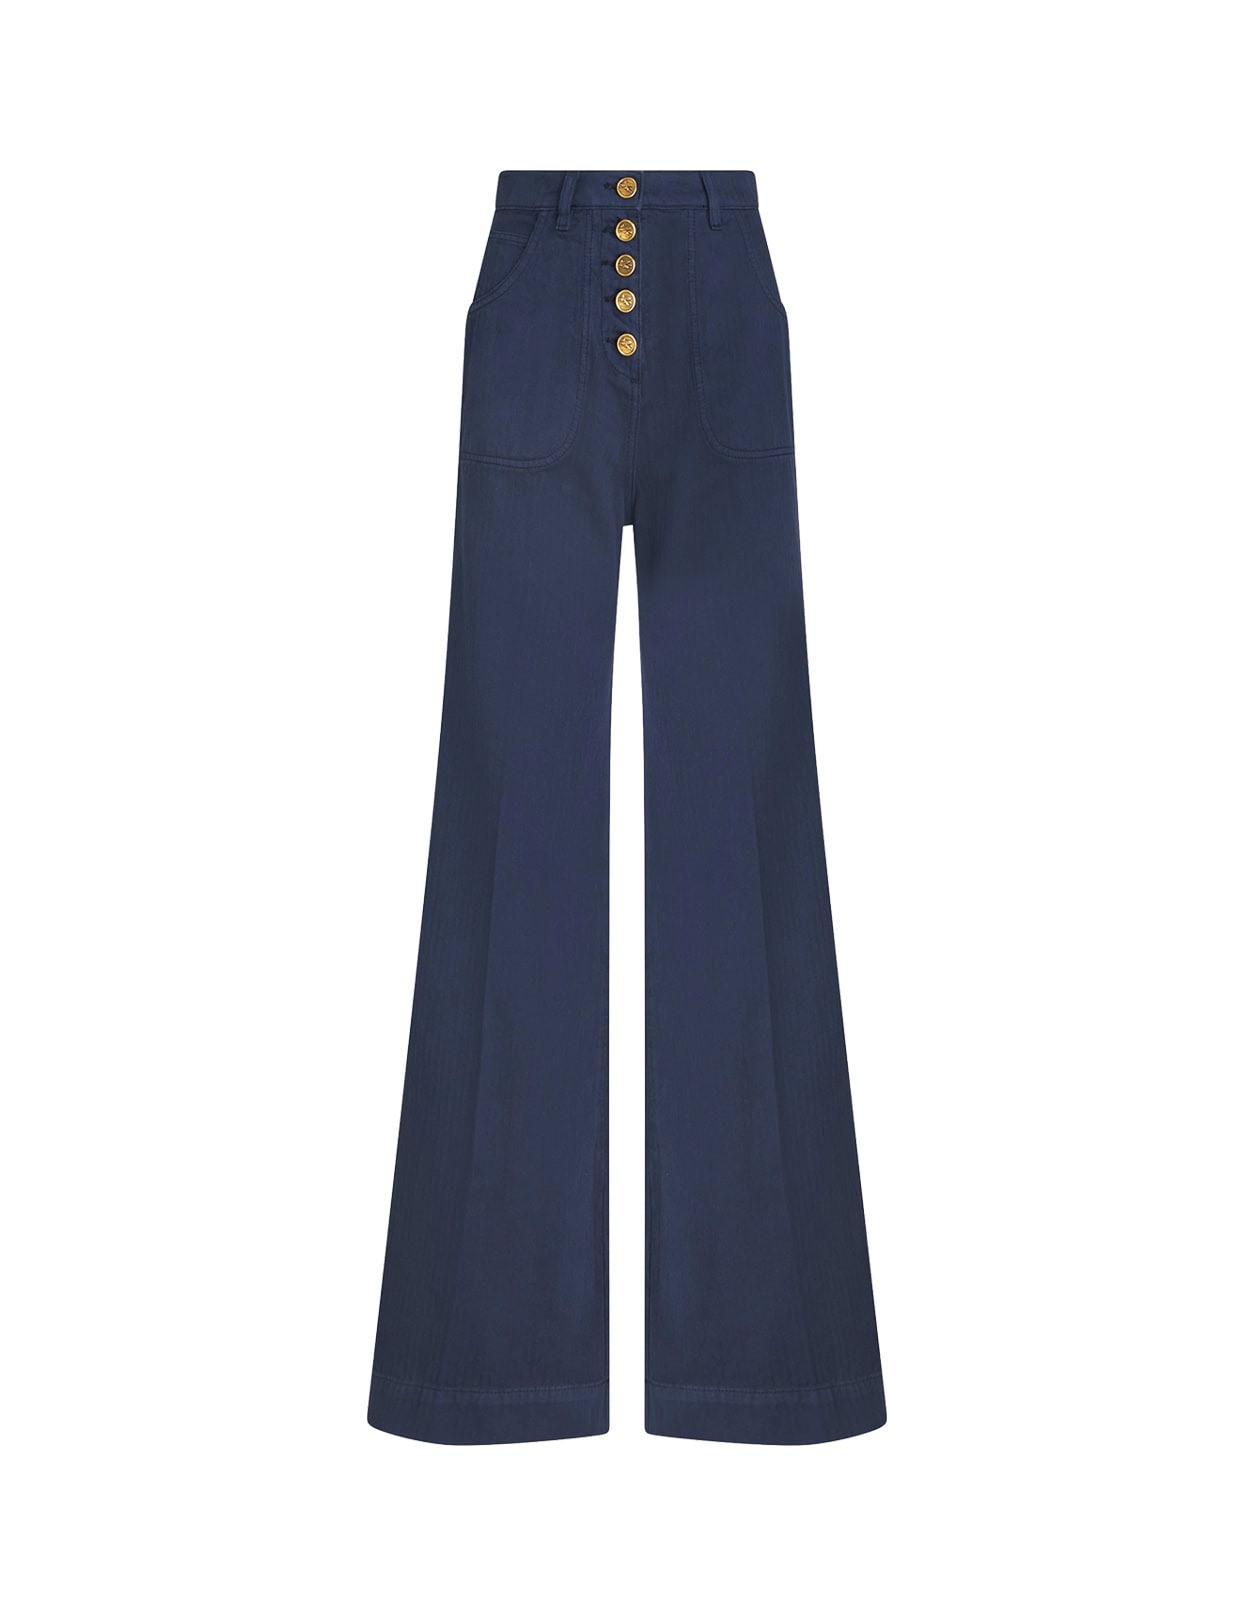 Etro Navy Blue Flare Jeans With Pegasus Buttons